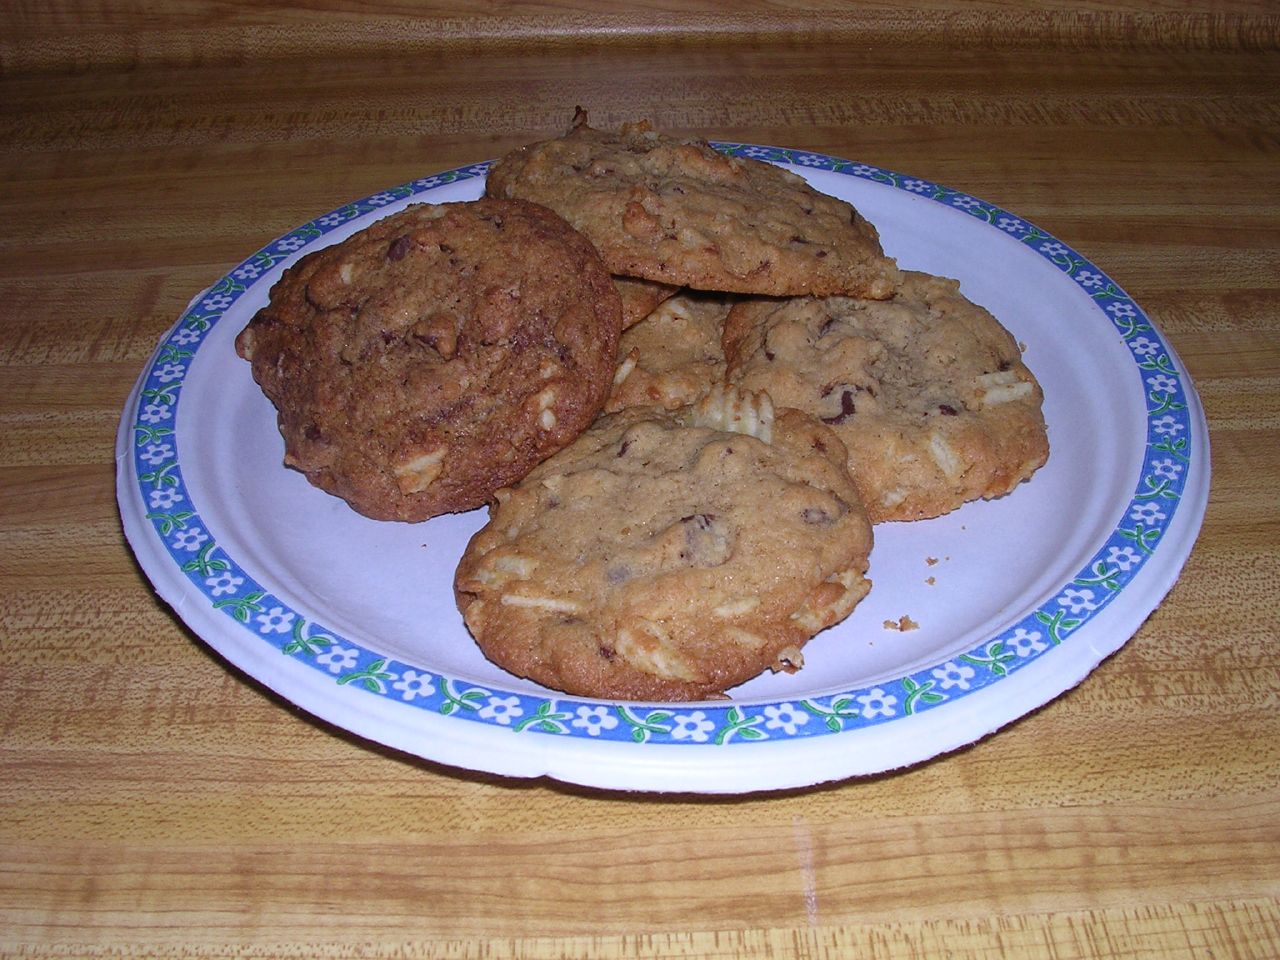 three chocolate chip cookies on a plate with blue trim